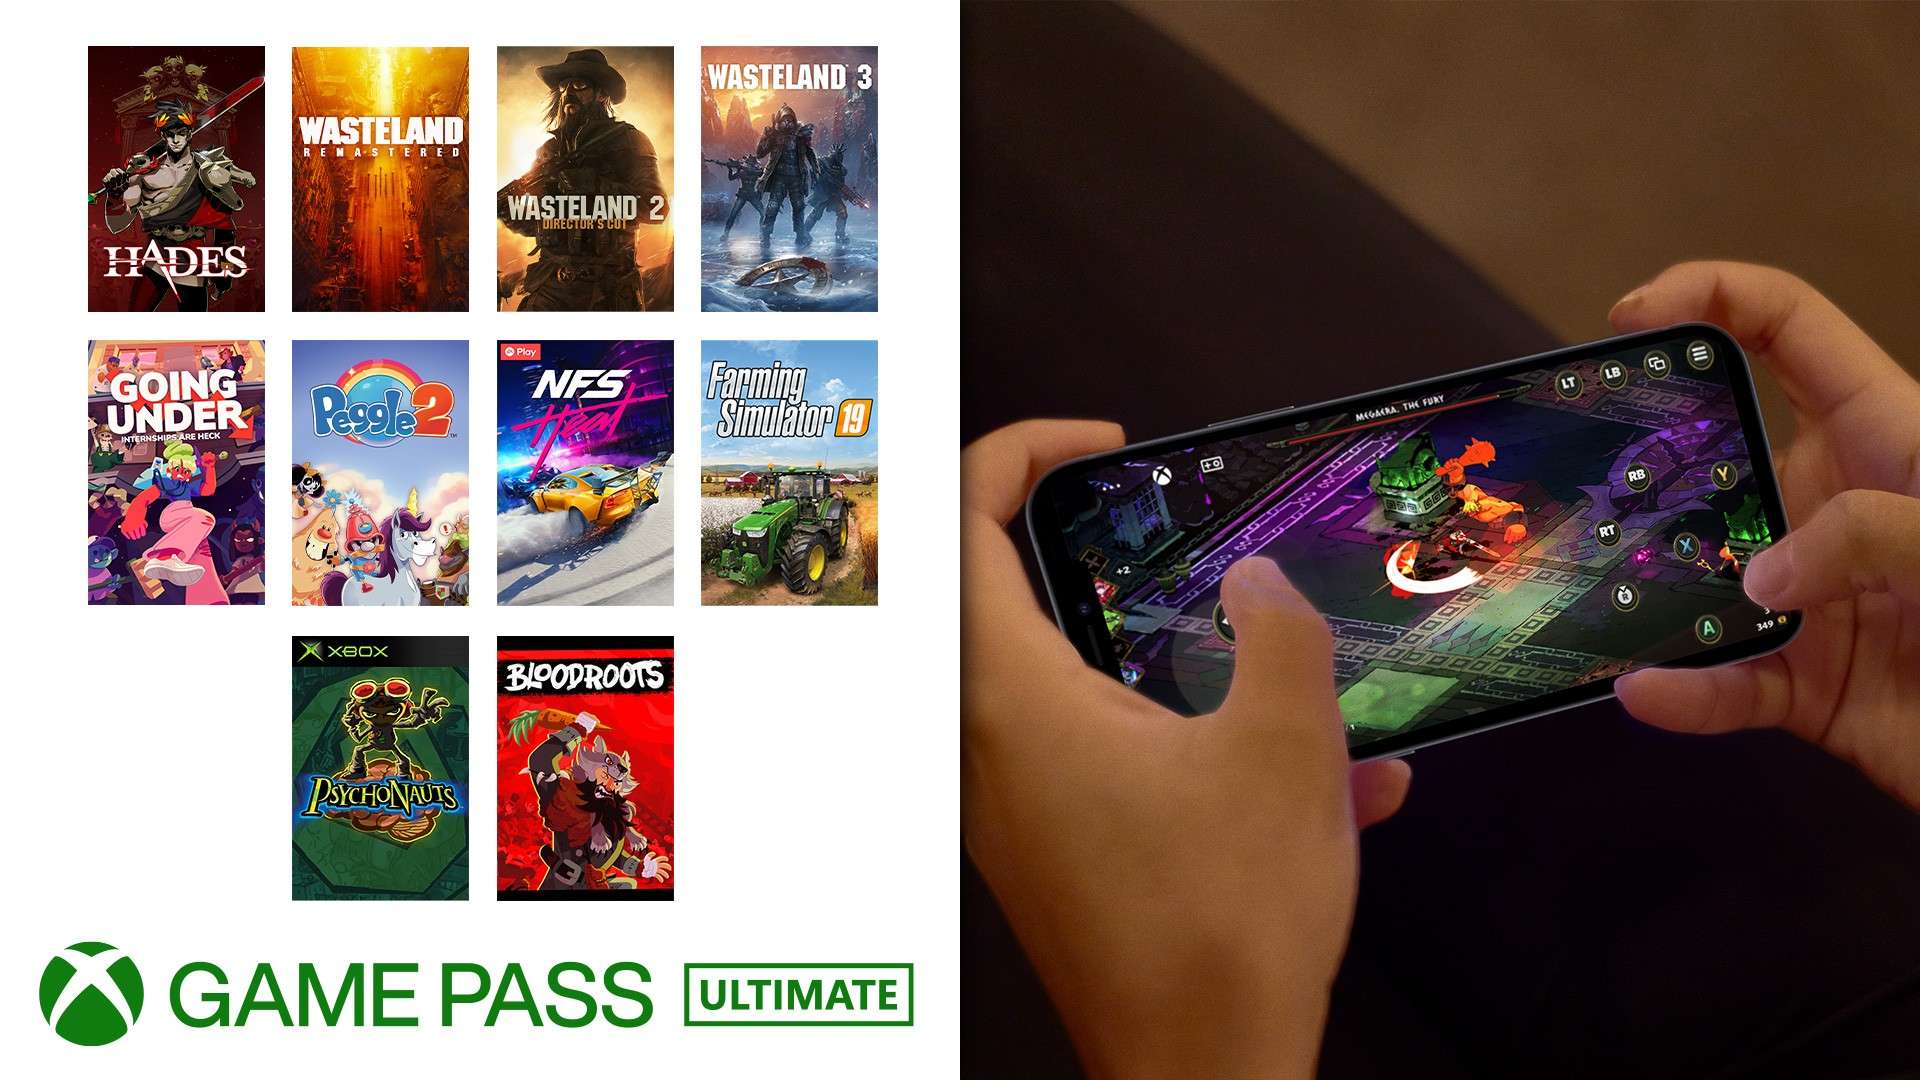 Hades is among Xbox Game Pass titles leaving the service this